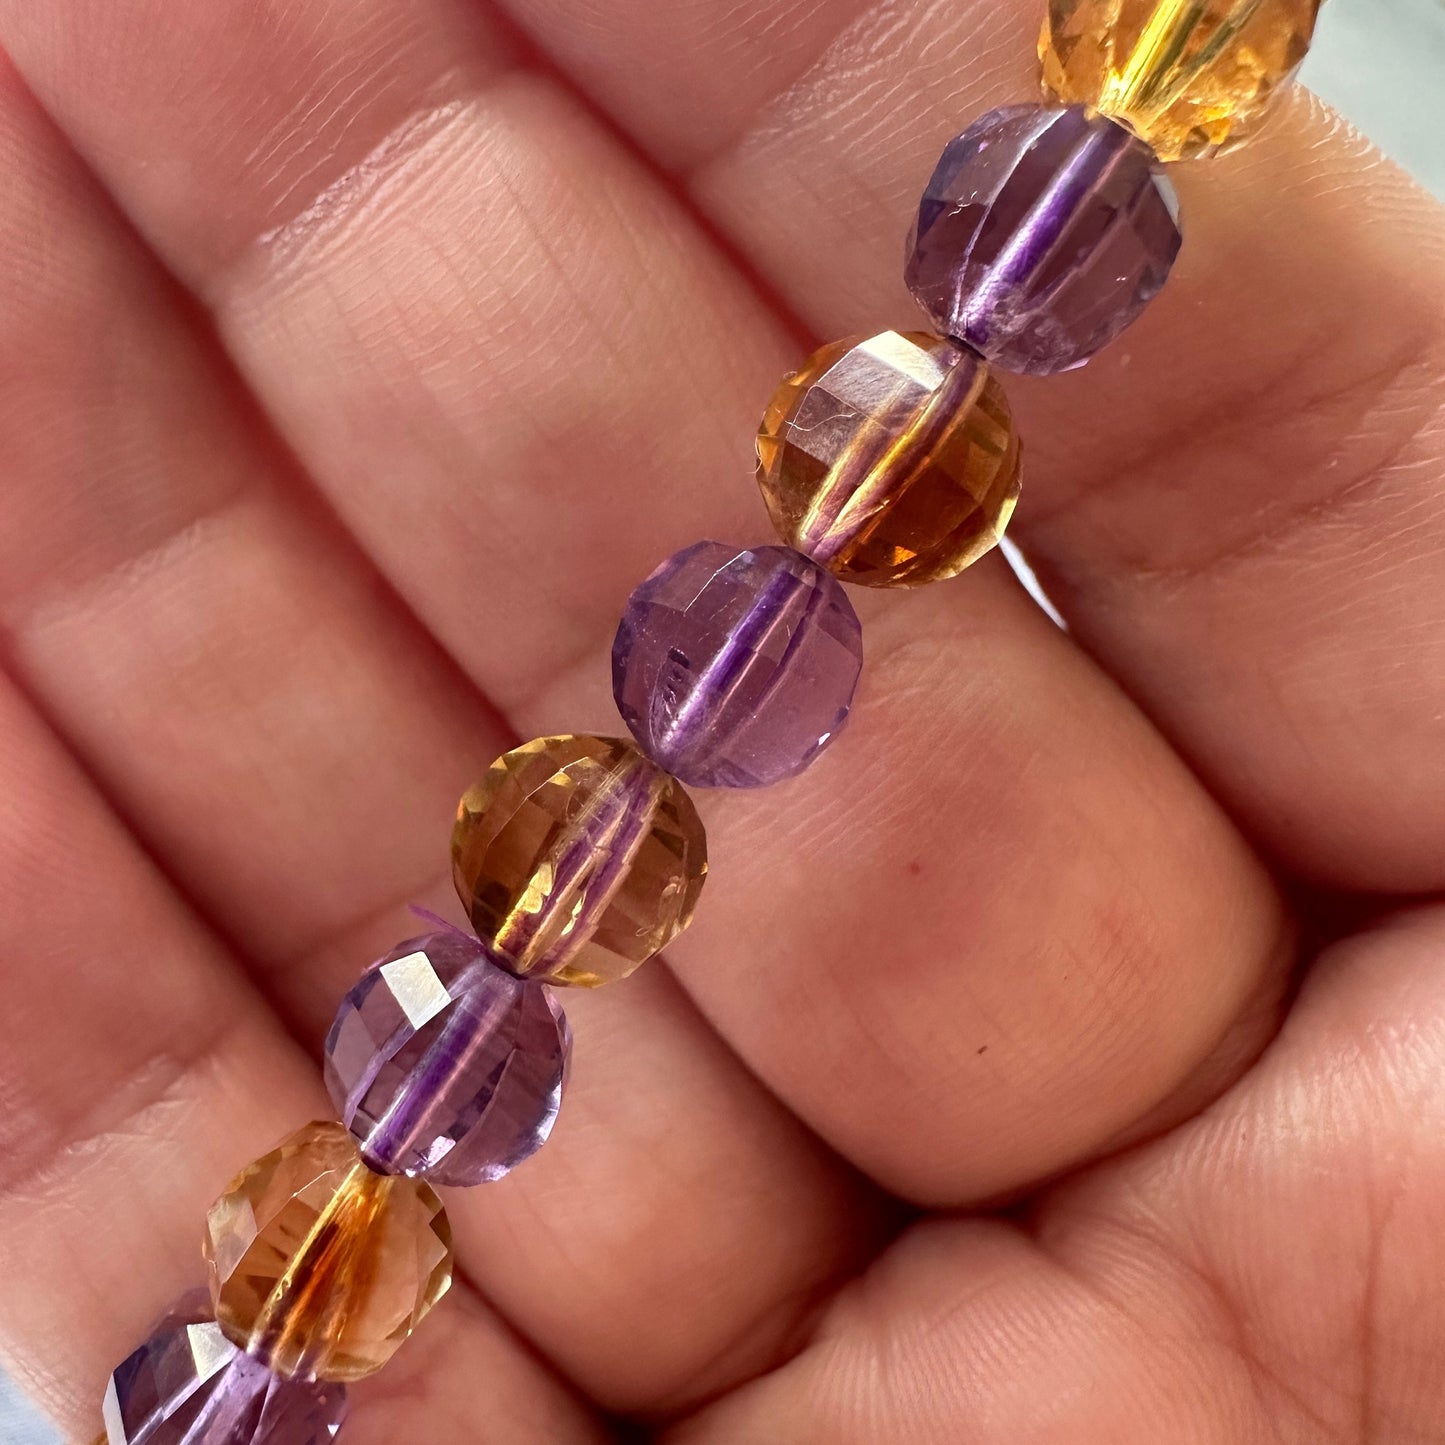 Elegant Citrine & Amethyst Faceted Bracelet With AAA Clarity High-Quality Crystal